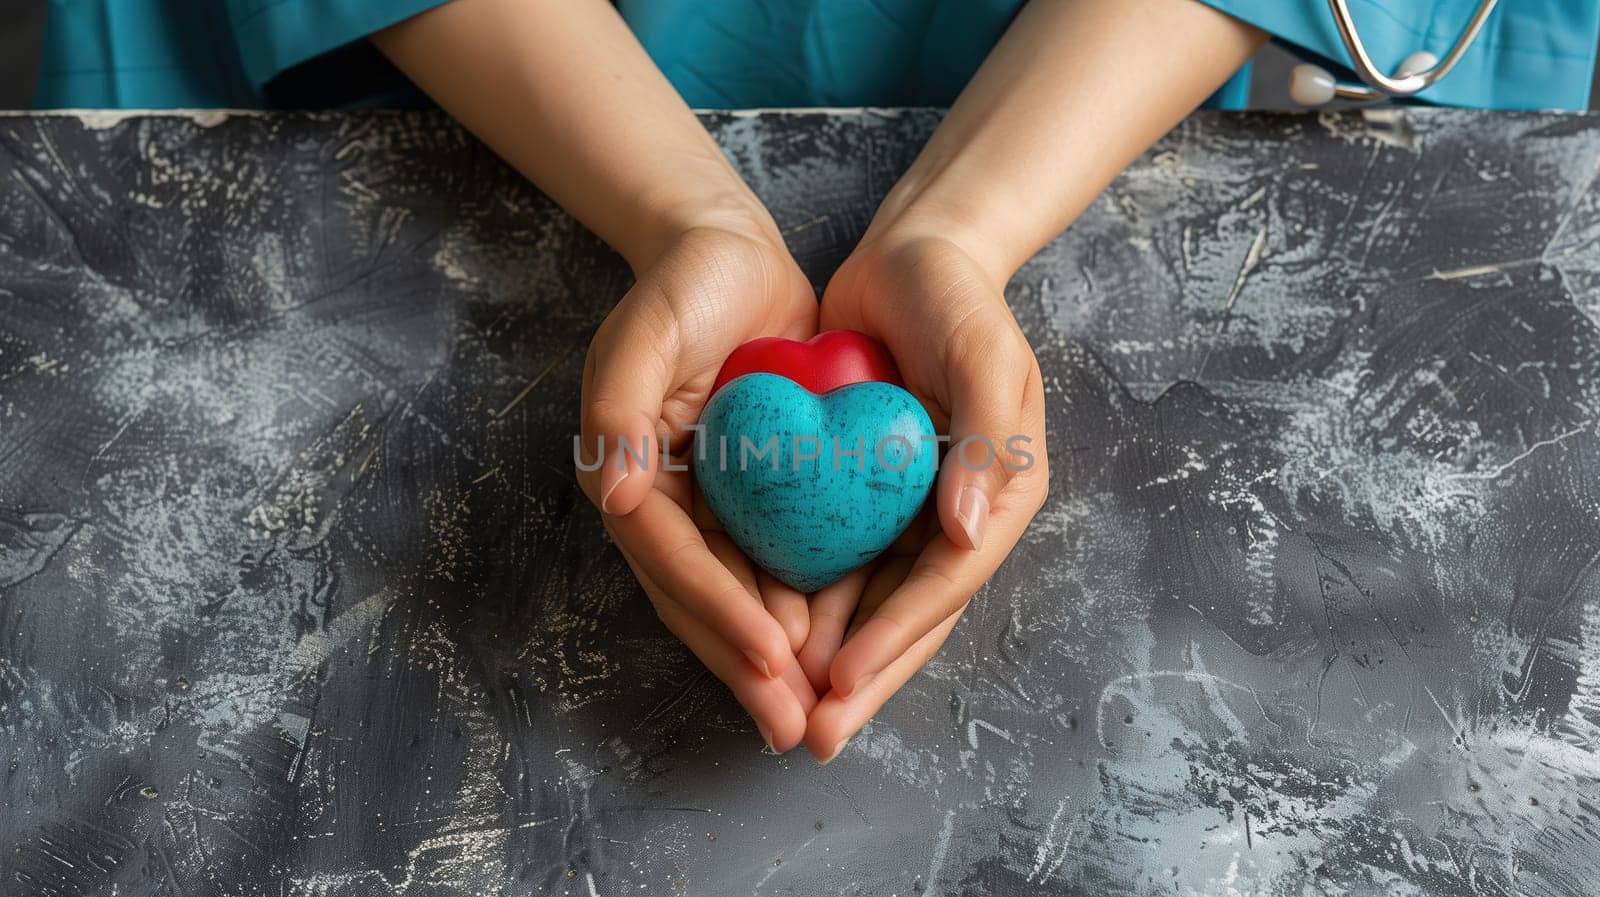 A person is shown holding a heart in their hands, with a clear focus on the hands and the heart. The hands are gently cradling the heart, symbolizing care and love.